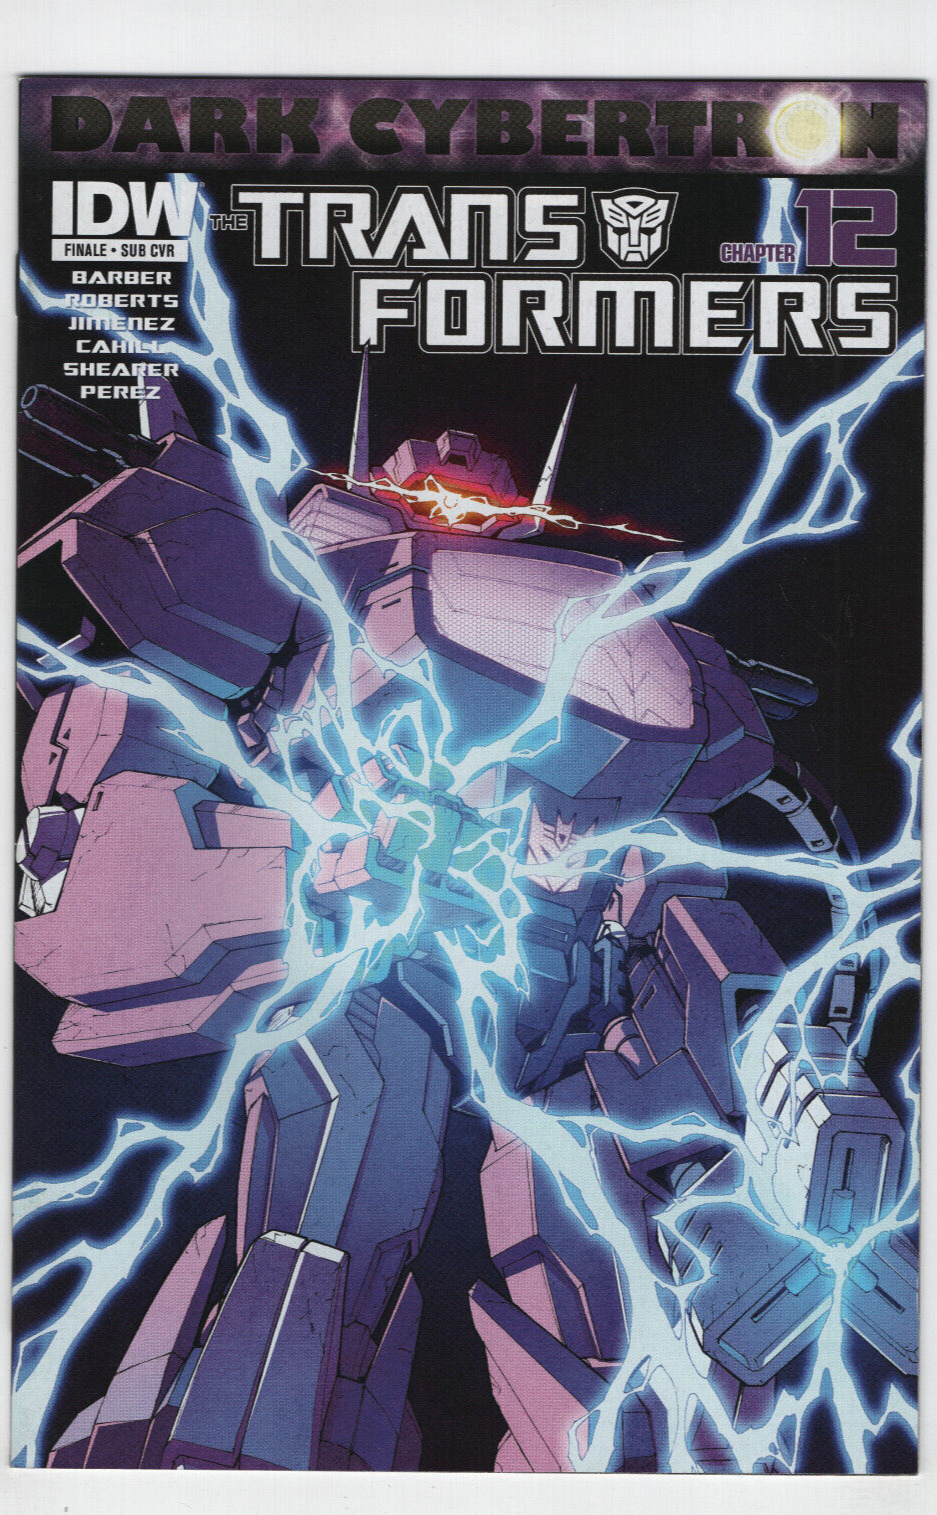 Transformers Dark Cybertron Finale Chapter 12 Sub Shockwave Variant IDW Comics